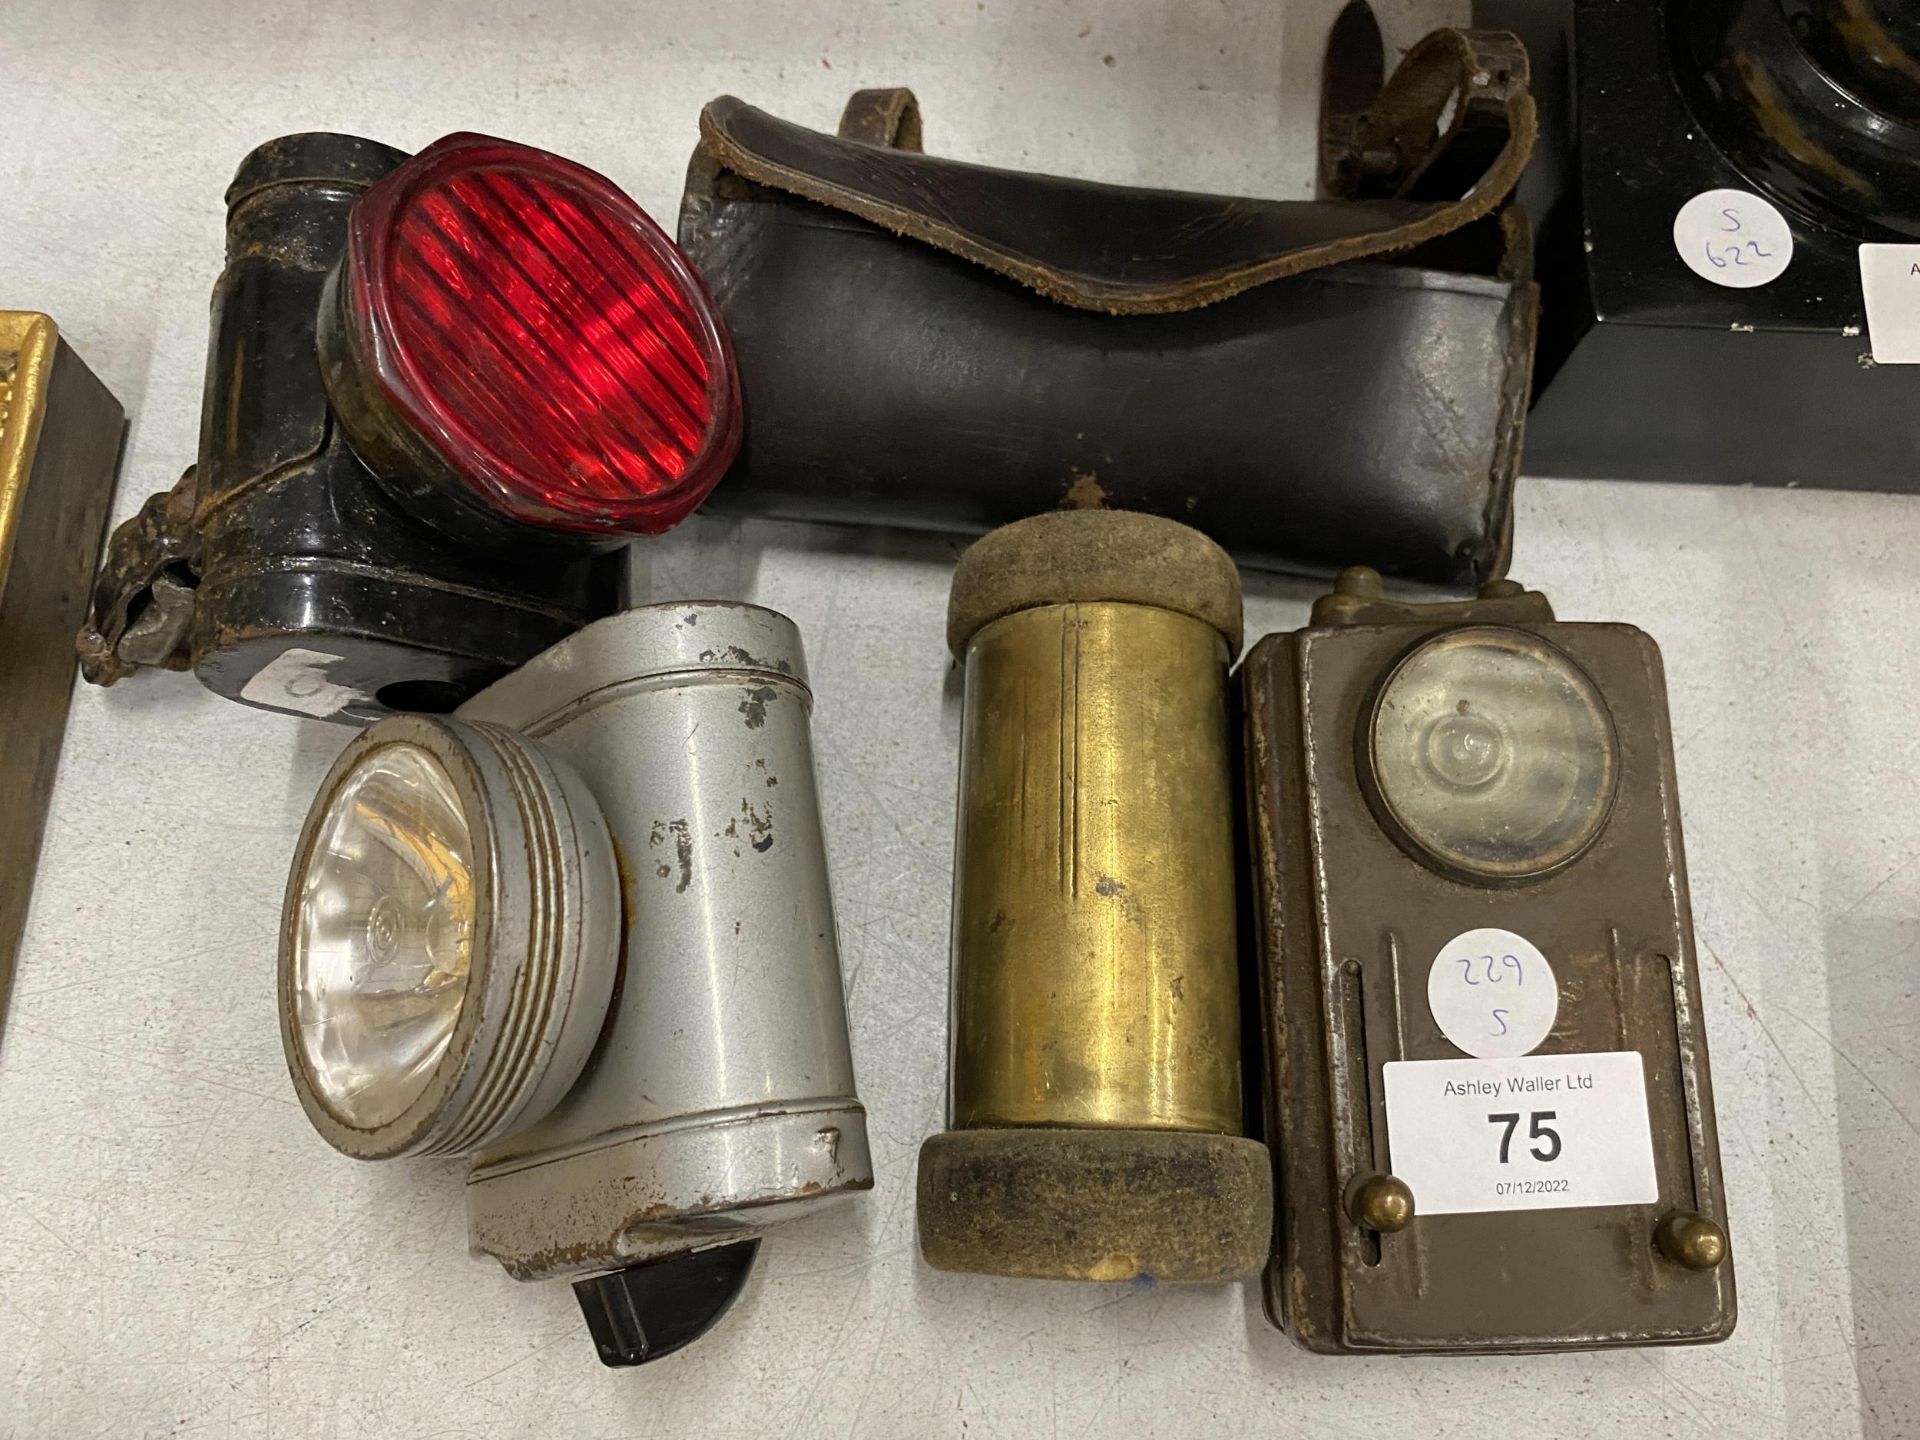 A MIXED LOT OF VINTAGE RAILWAY LIGHTS